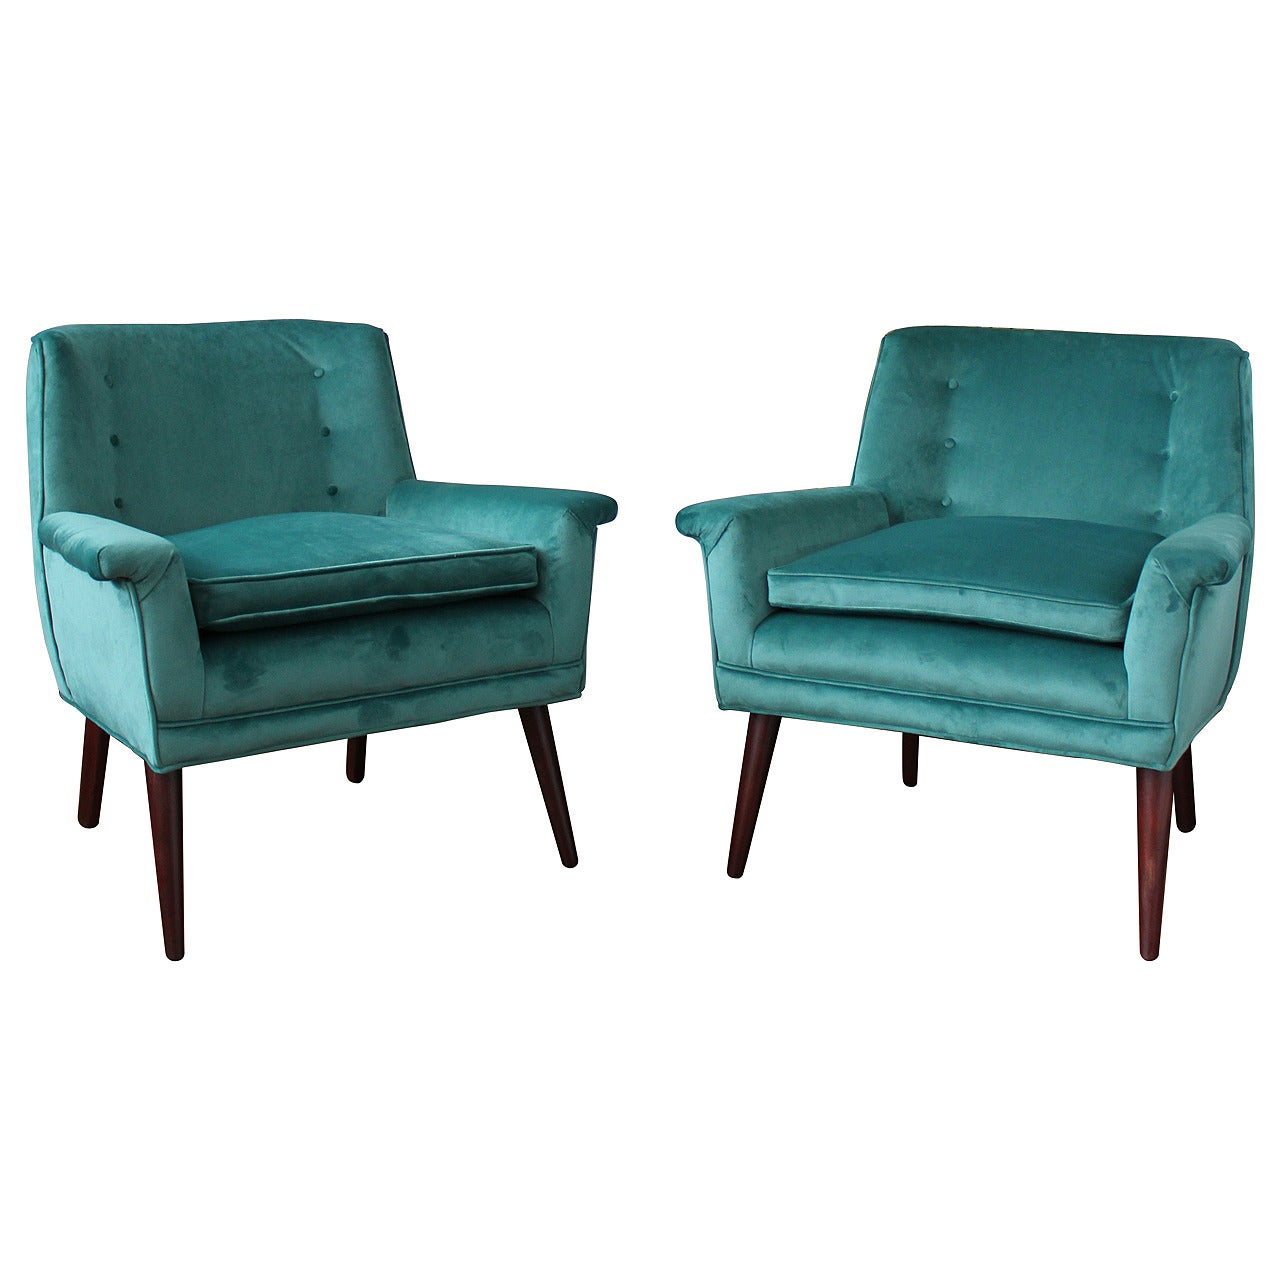 Exceptional Pair of Paul McCobb Style Lounge Chairs in Teal Velvet and Walnut